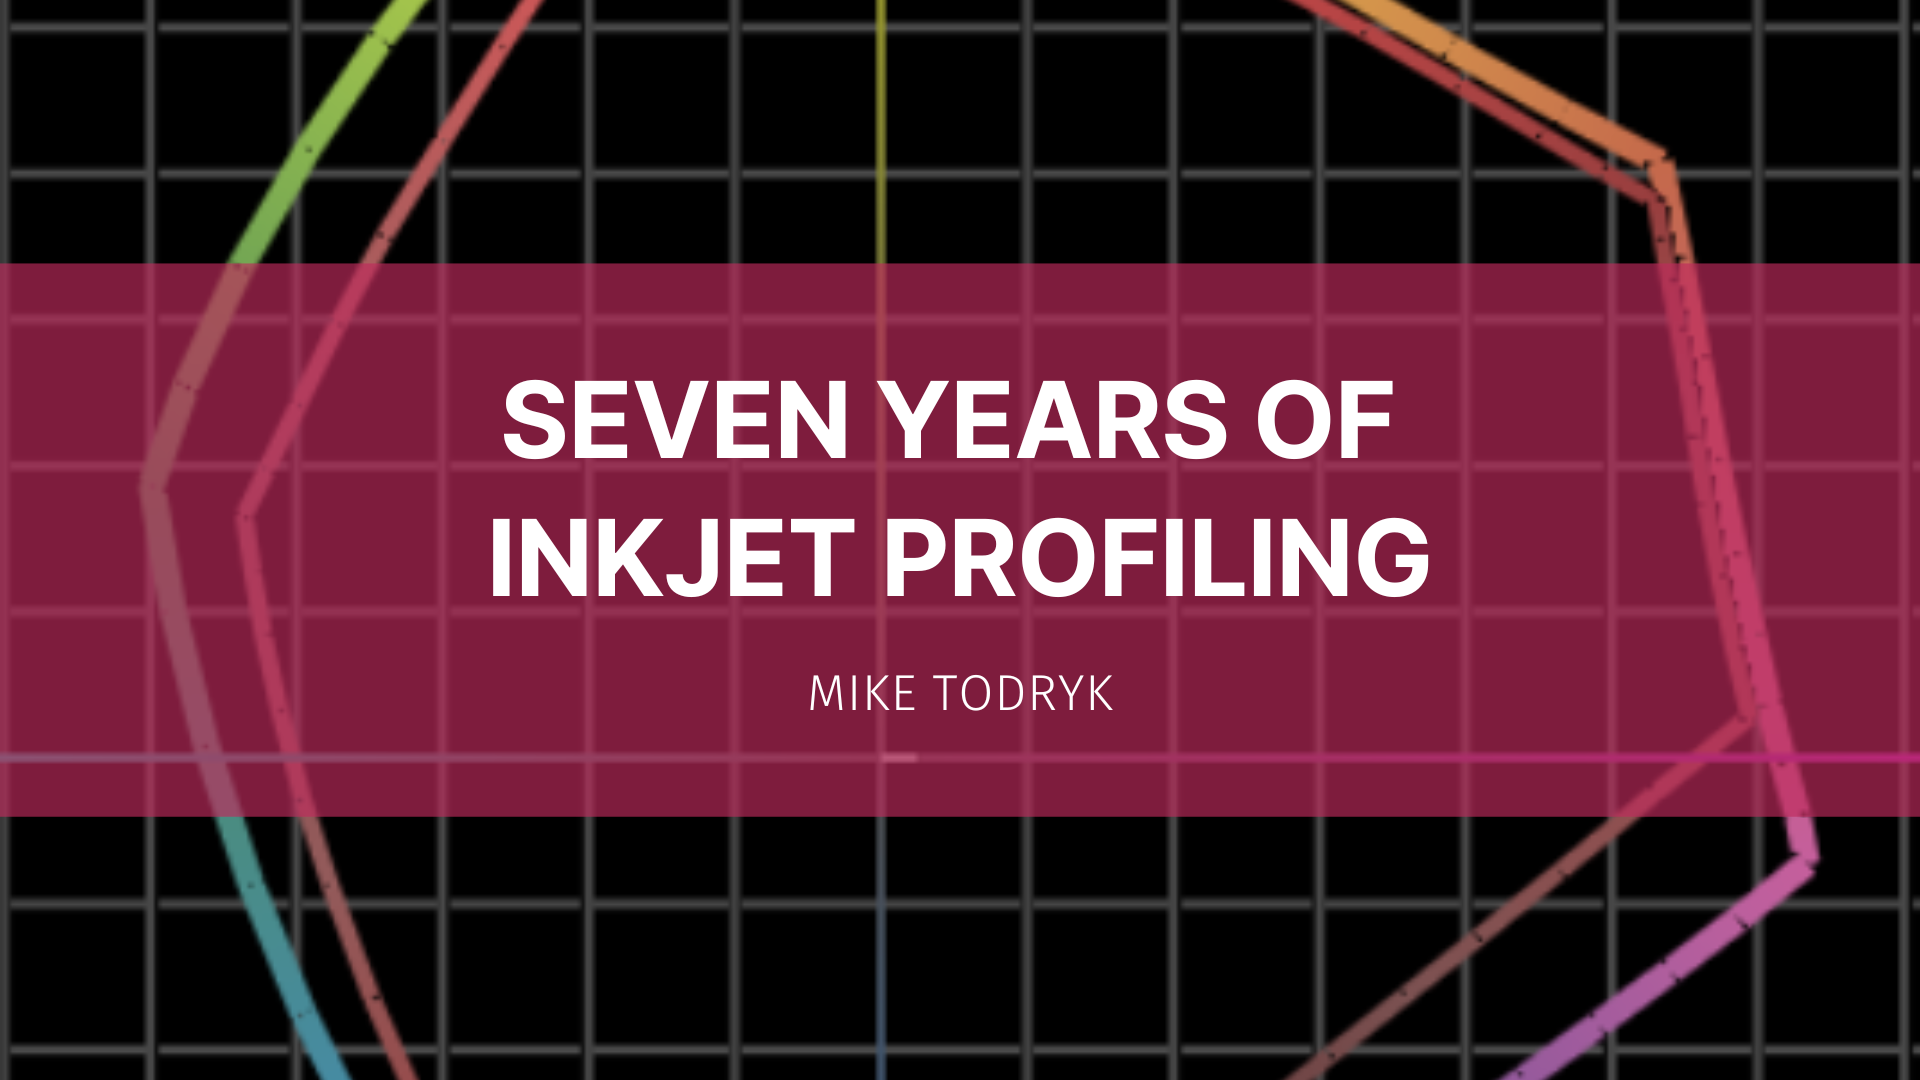 Featured image for “Seven years of inkjet profiling”